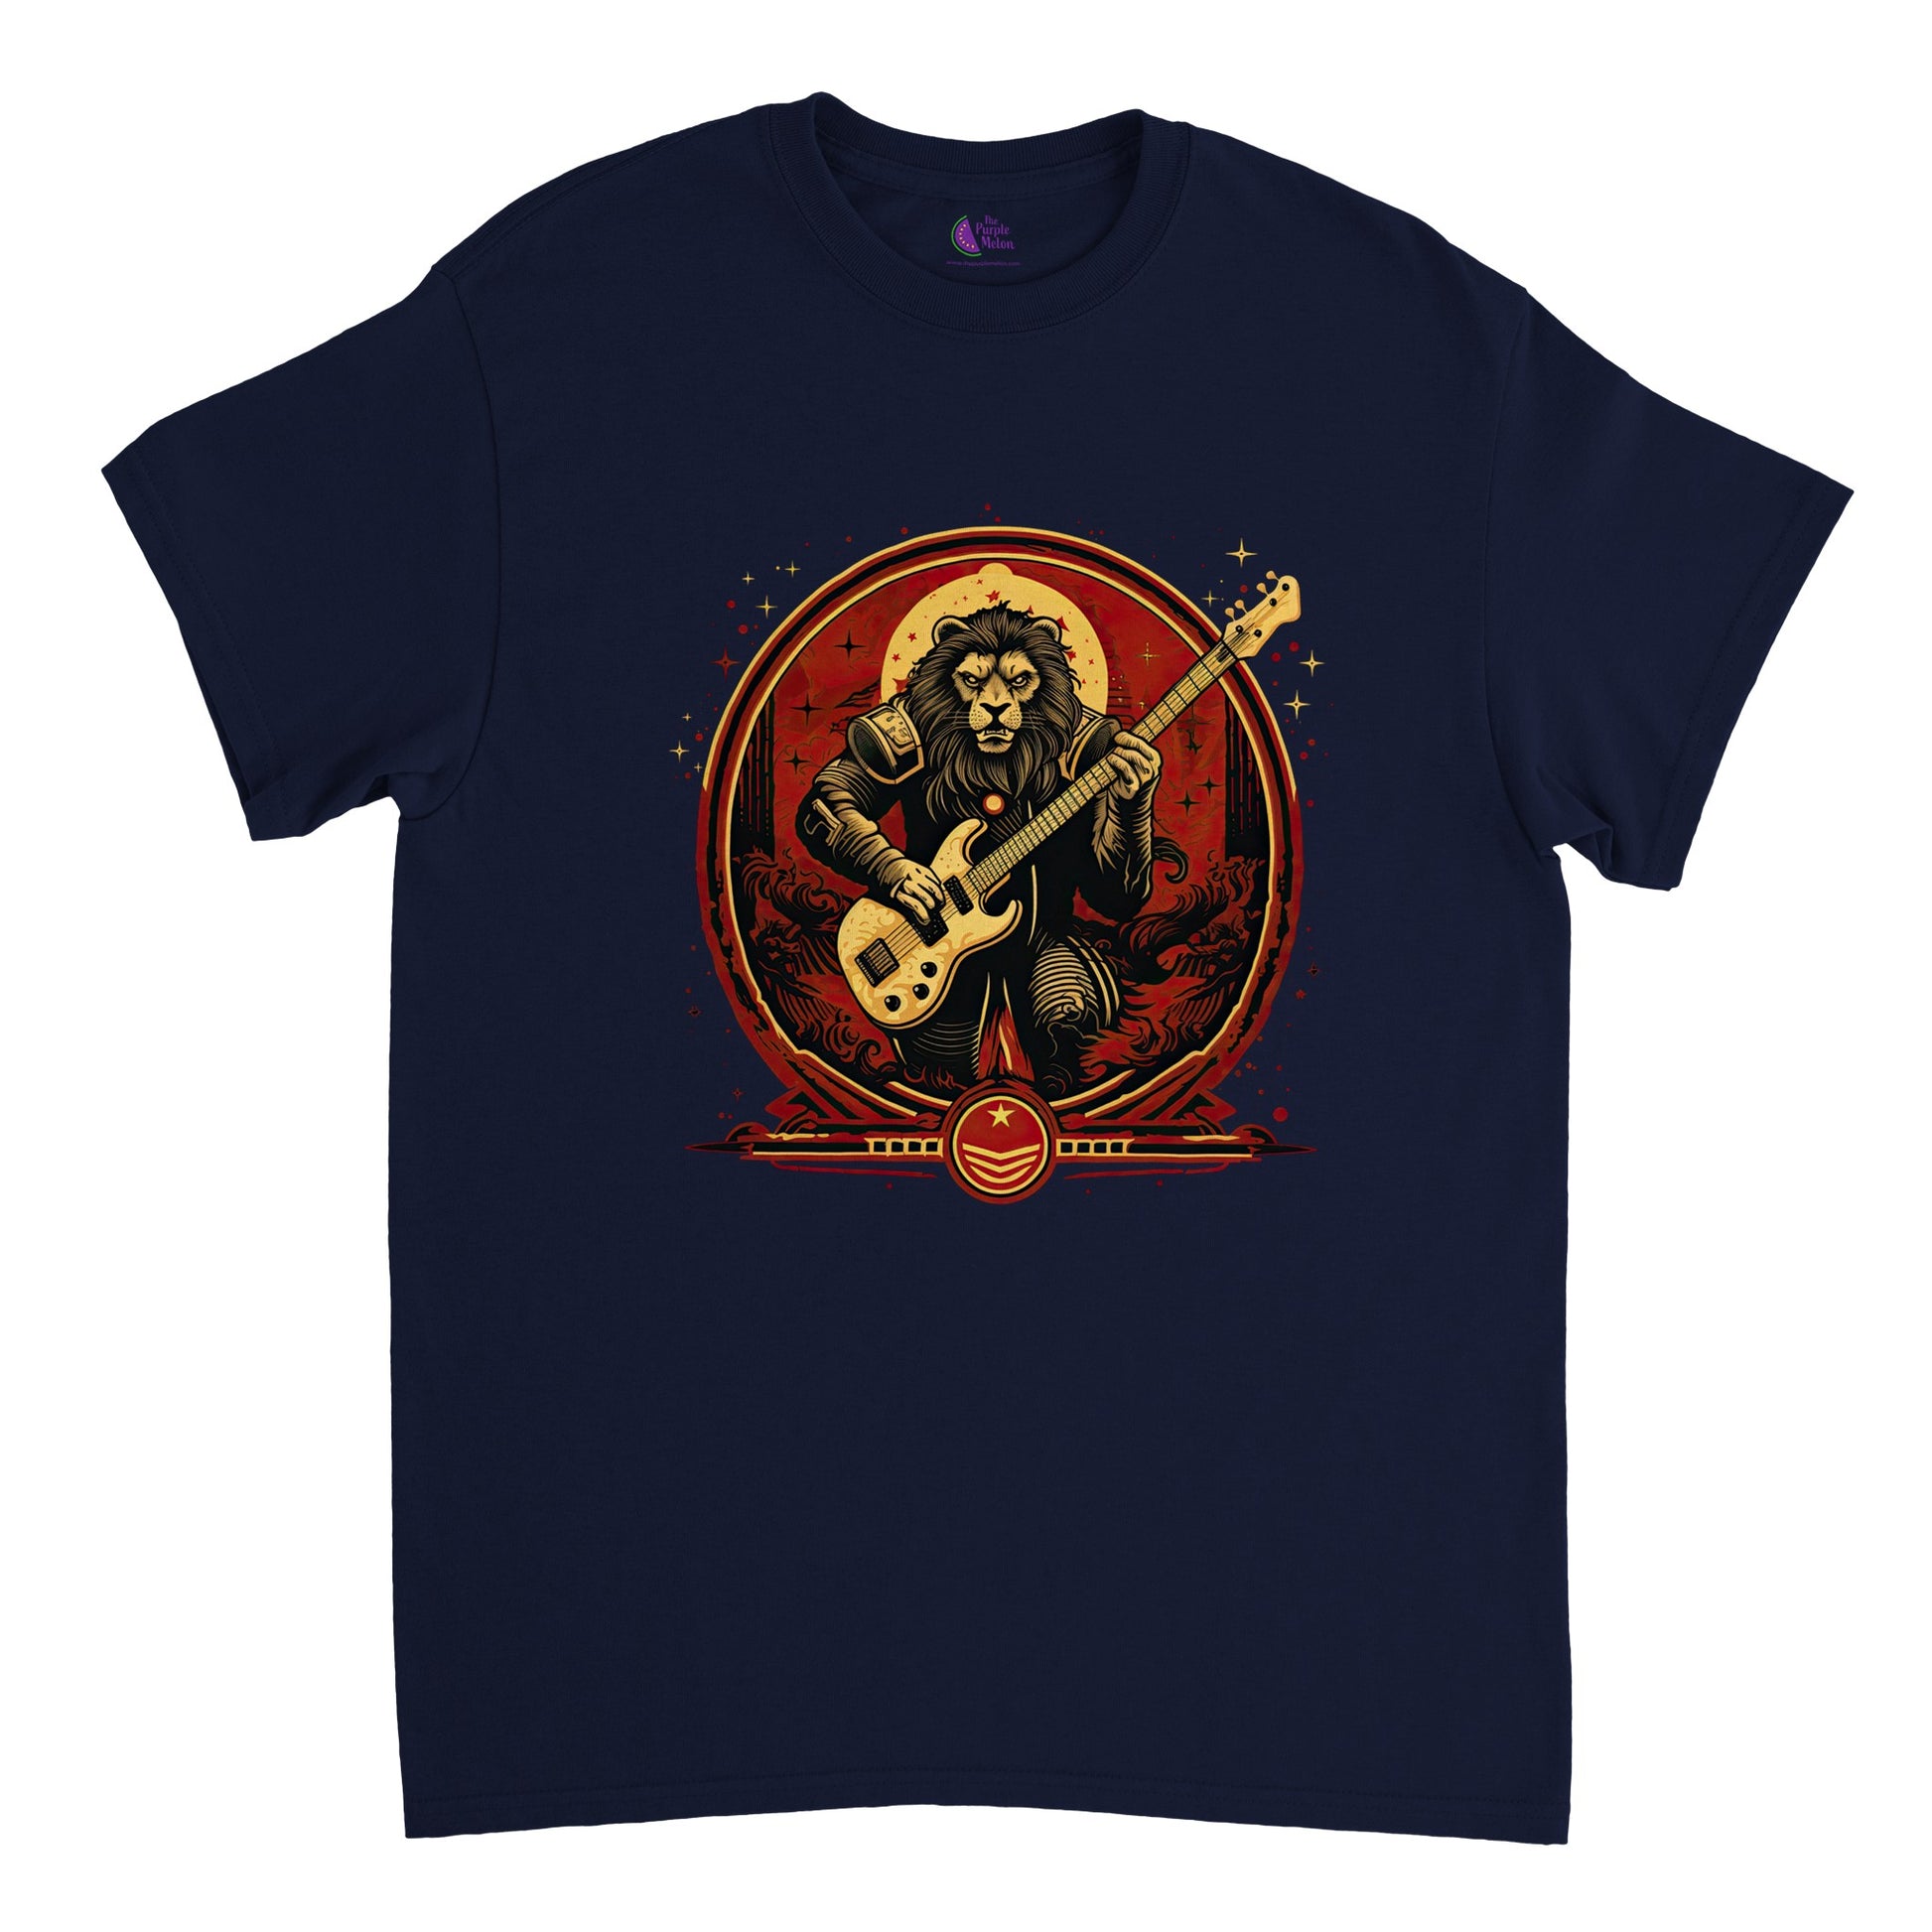 Navy blue t-shirt with a warrior ion bassist print